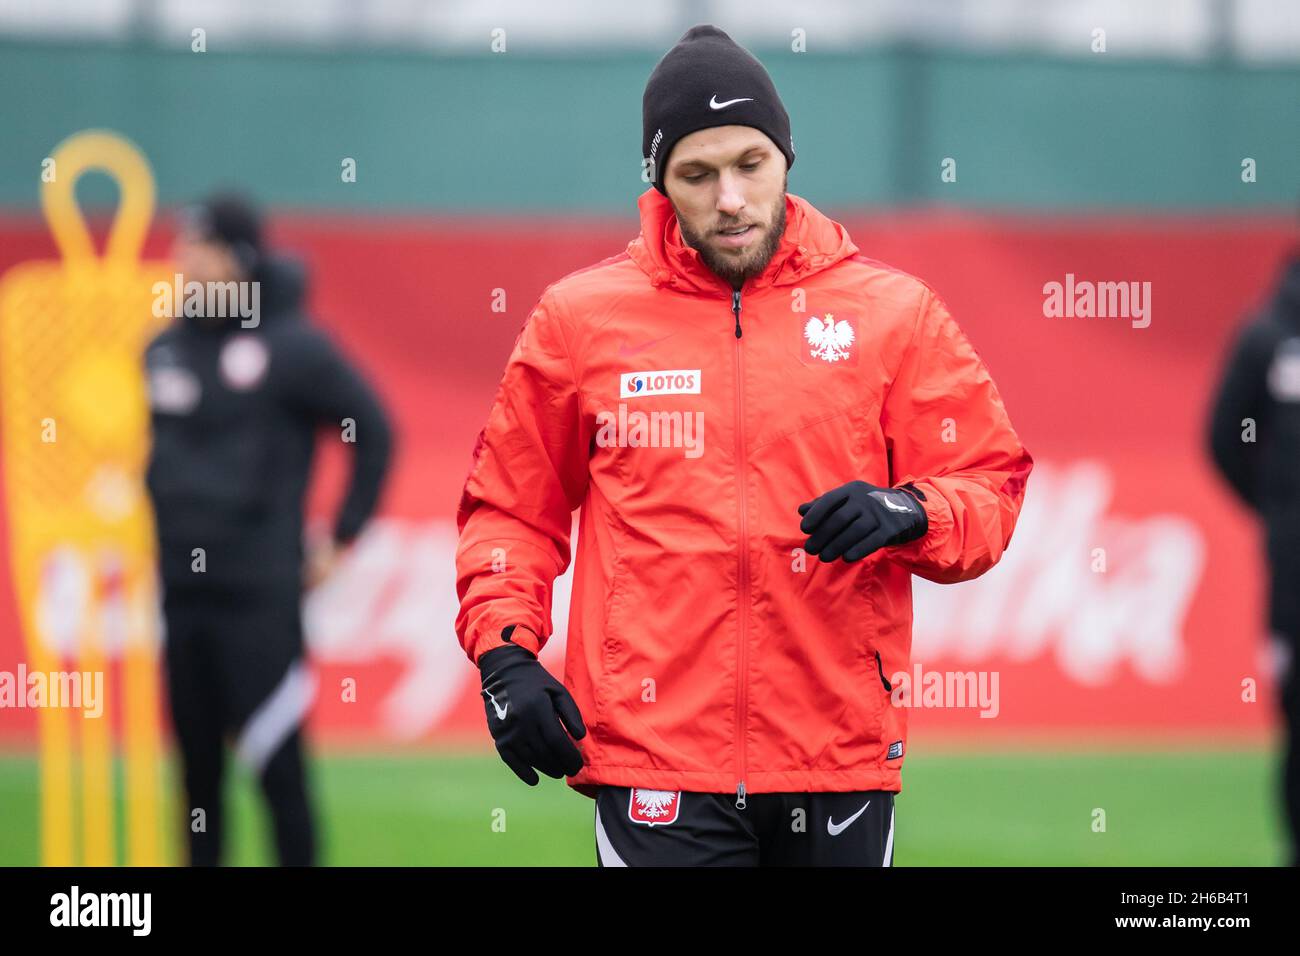 Warsaw, Poland. 14th Nov, 2021. Maciej Rybus of Poland in action during the official training session of the Polish national football team before FIFA World Cup Qatar 2022 qualification match against Hungary in Warsaw. (Photo by Mikolaj Barbanell/SOPA Images/Sipa USA) Credit: Sipa USA/Alamy Live News Stock Photo